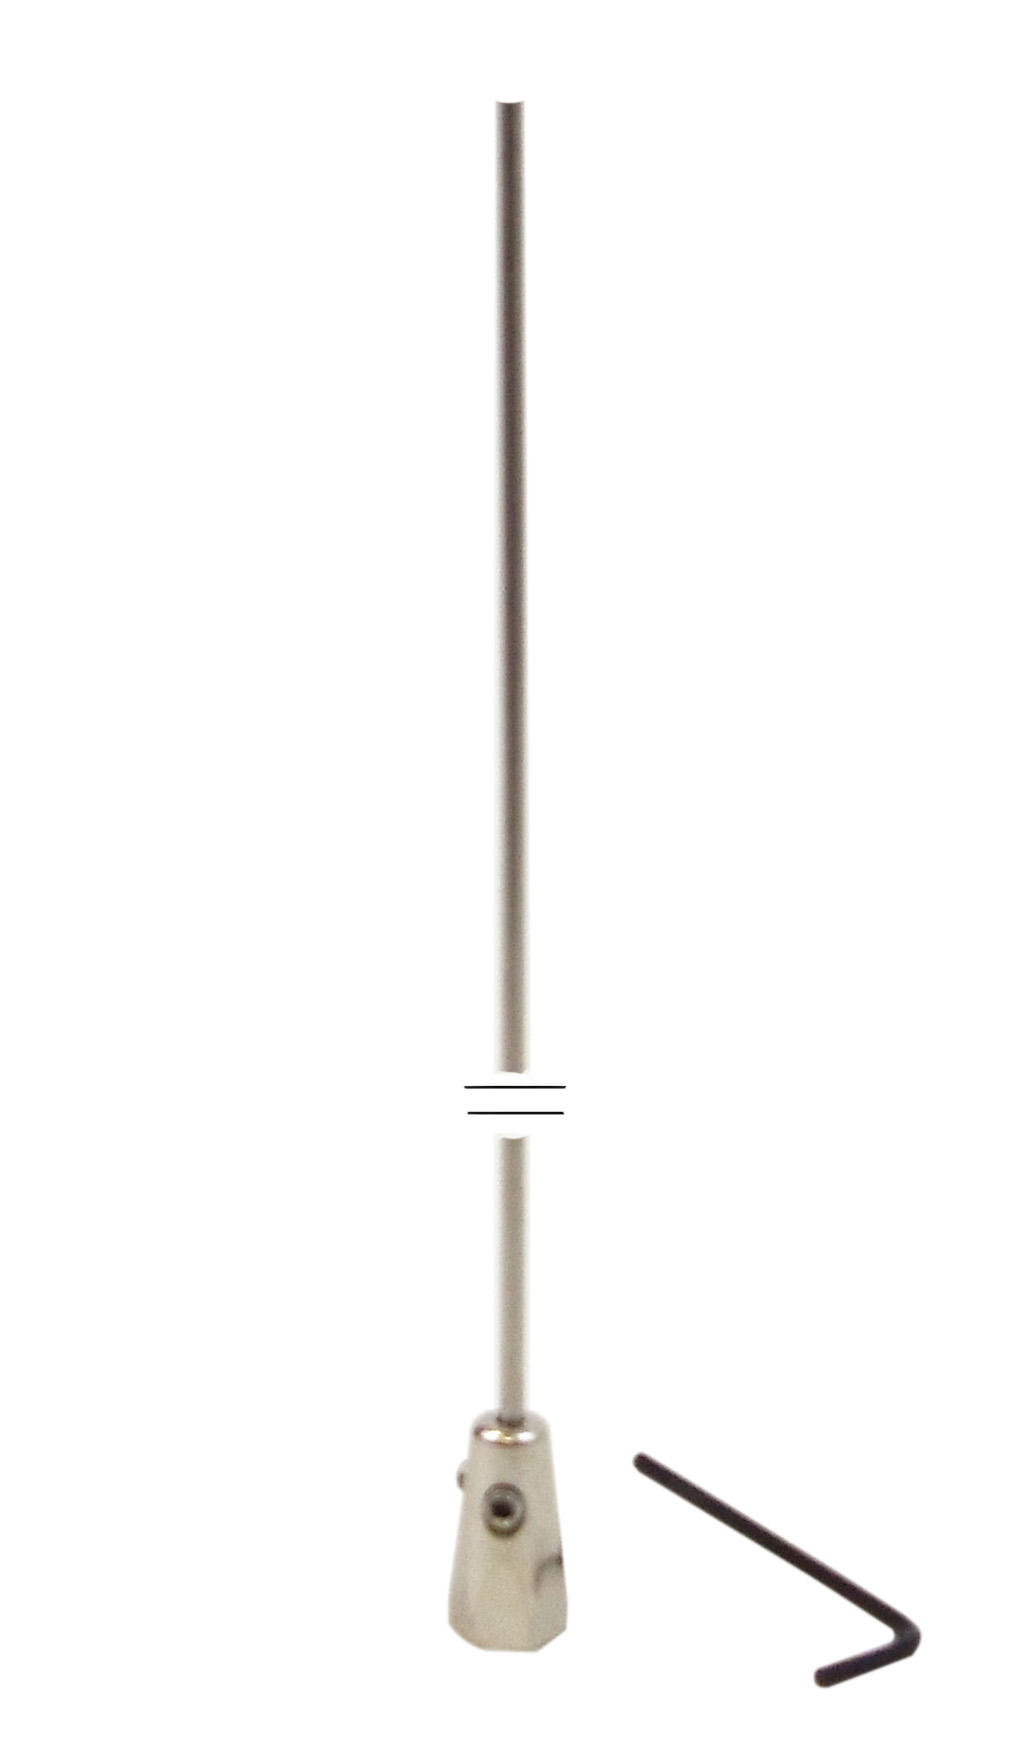 Larsen 54-1/2" Tall 52-88 Mhz Tuneable 1/4 Wave Unity Antenna With 100 Diameter Stainless Steel Whip. Rated At 200 Watts